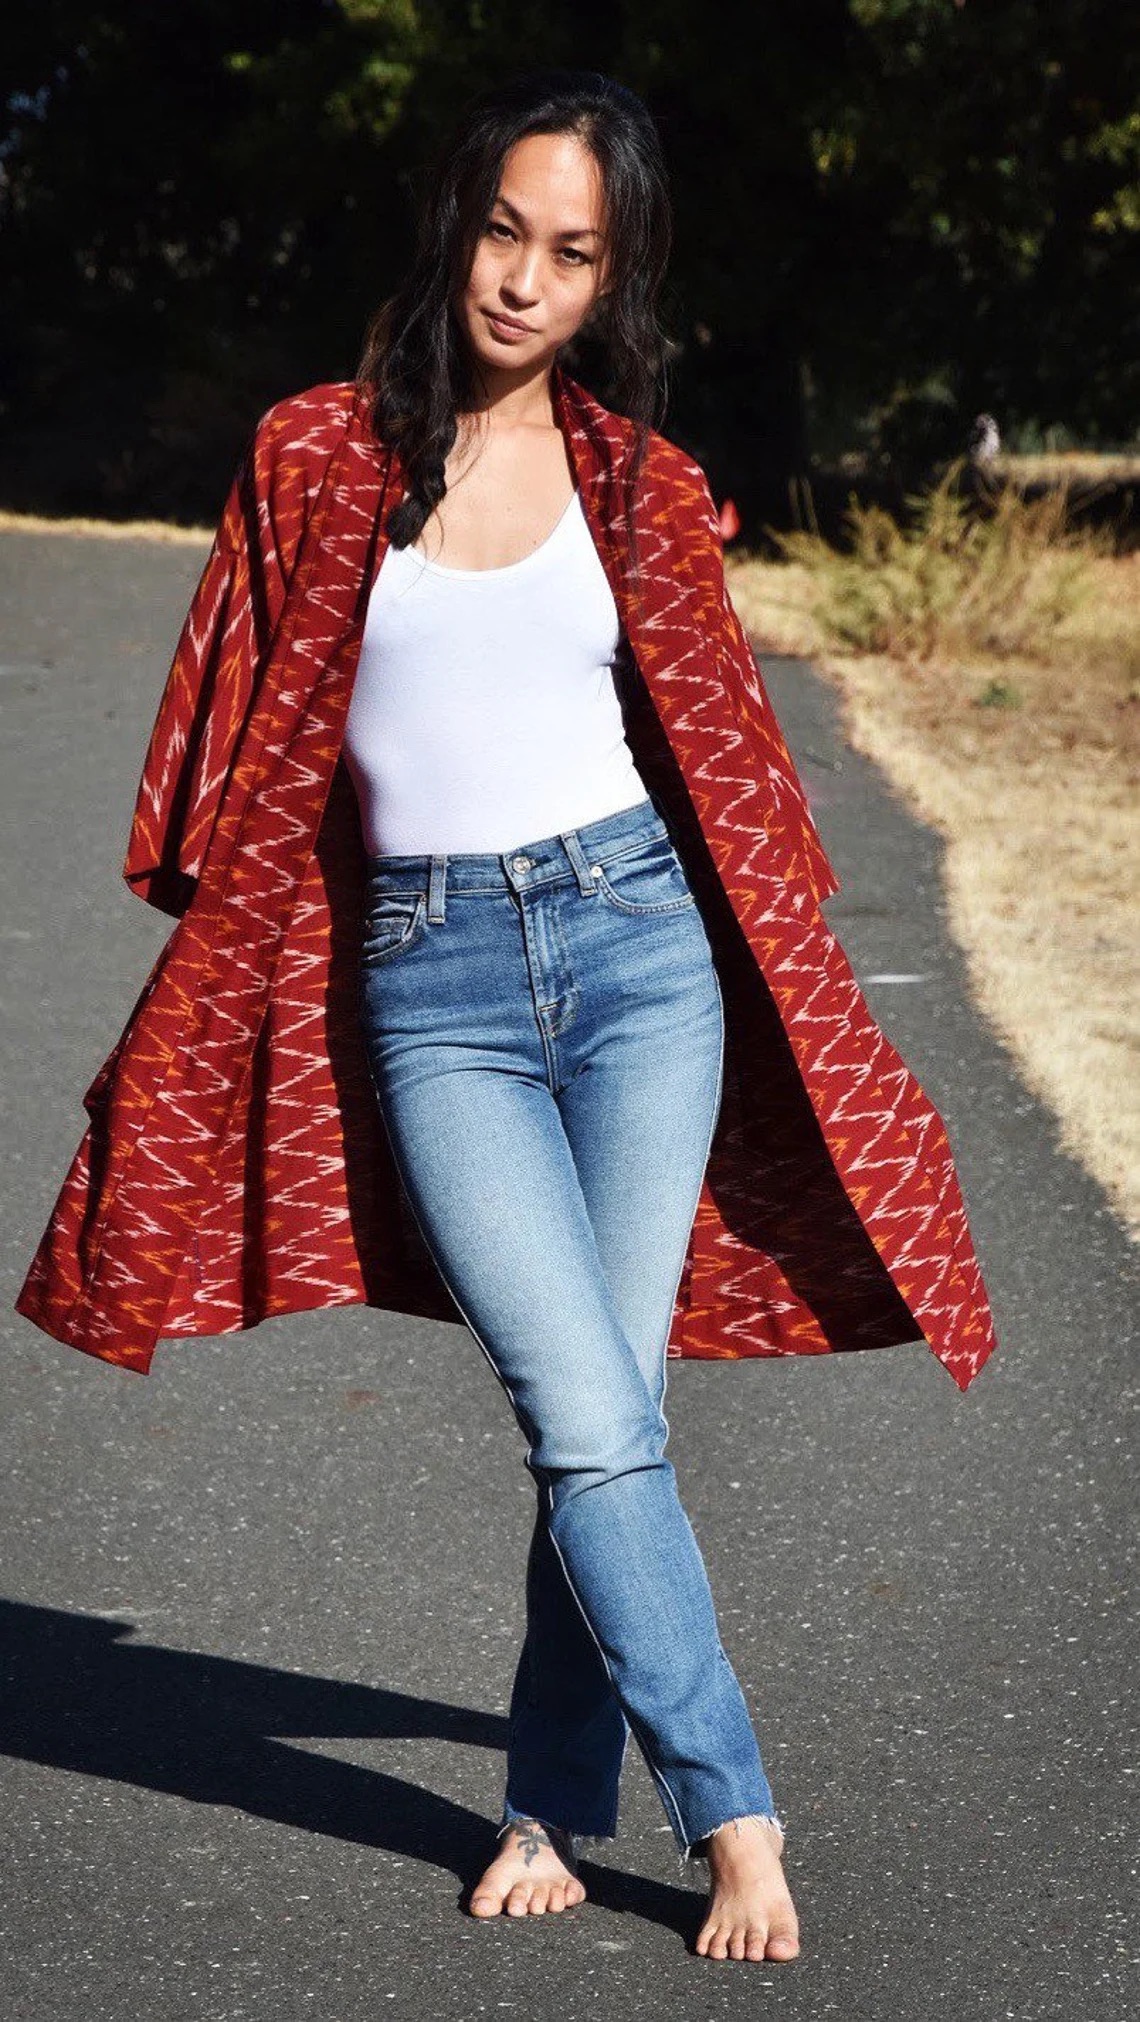 Woman walking on a road wearing jeans and a white top, with a red patterned cardigan flowing behind her.